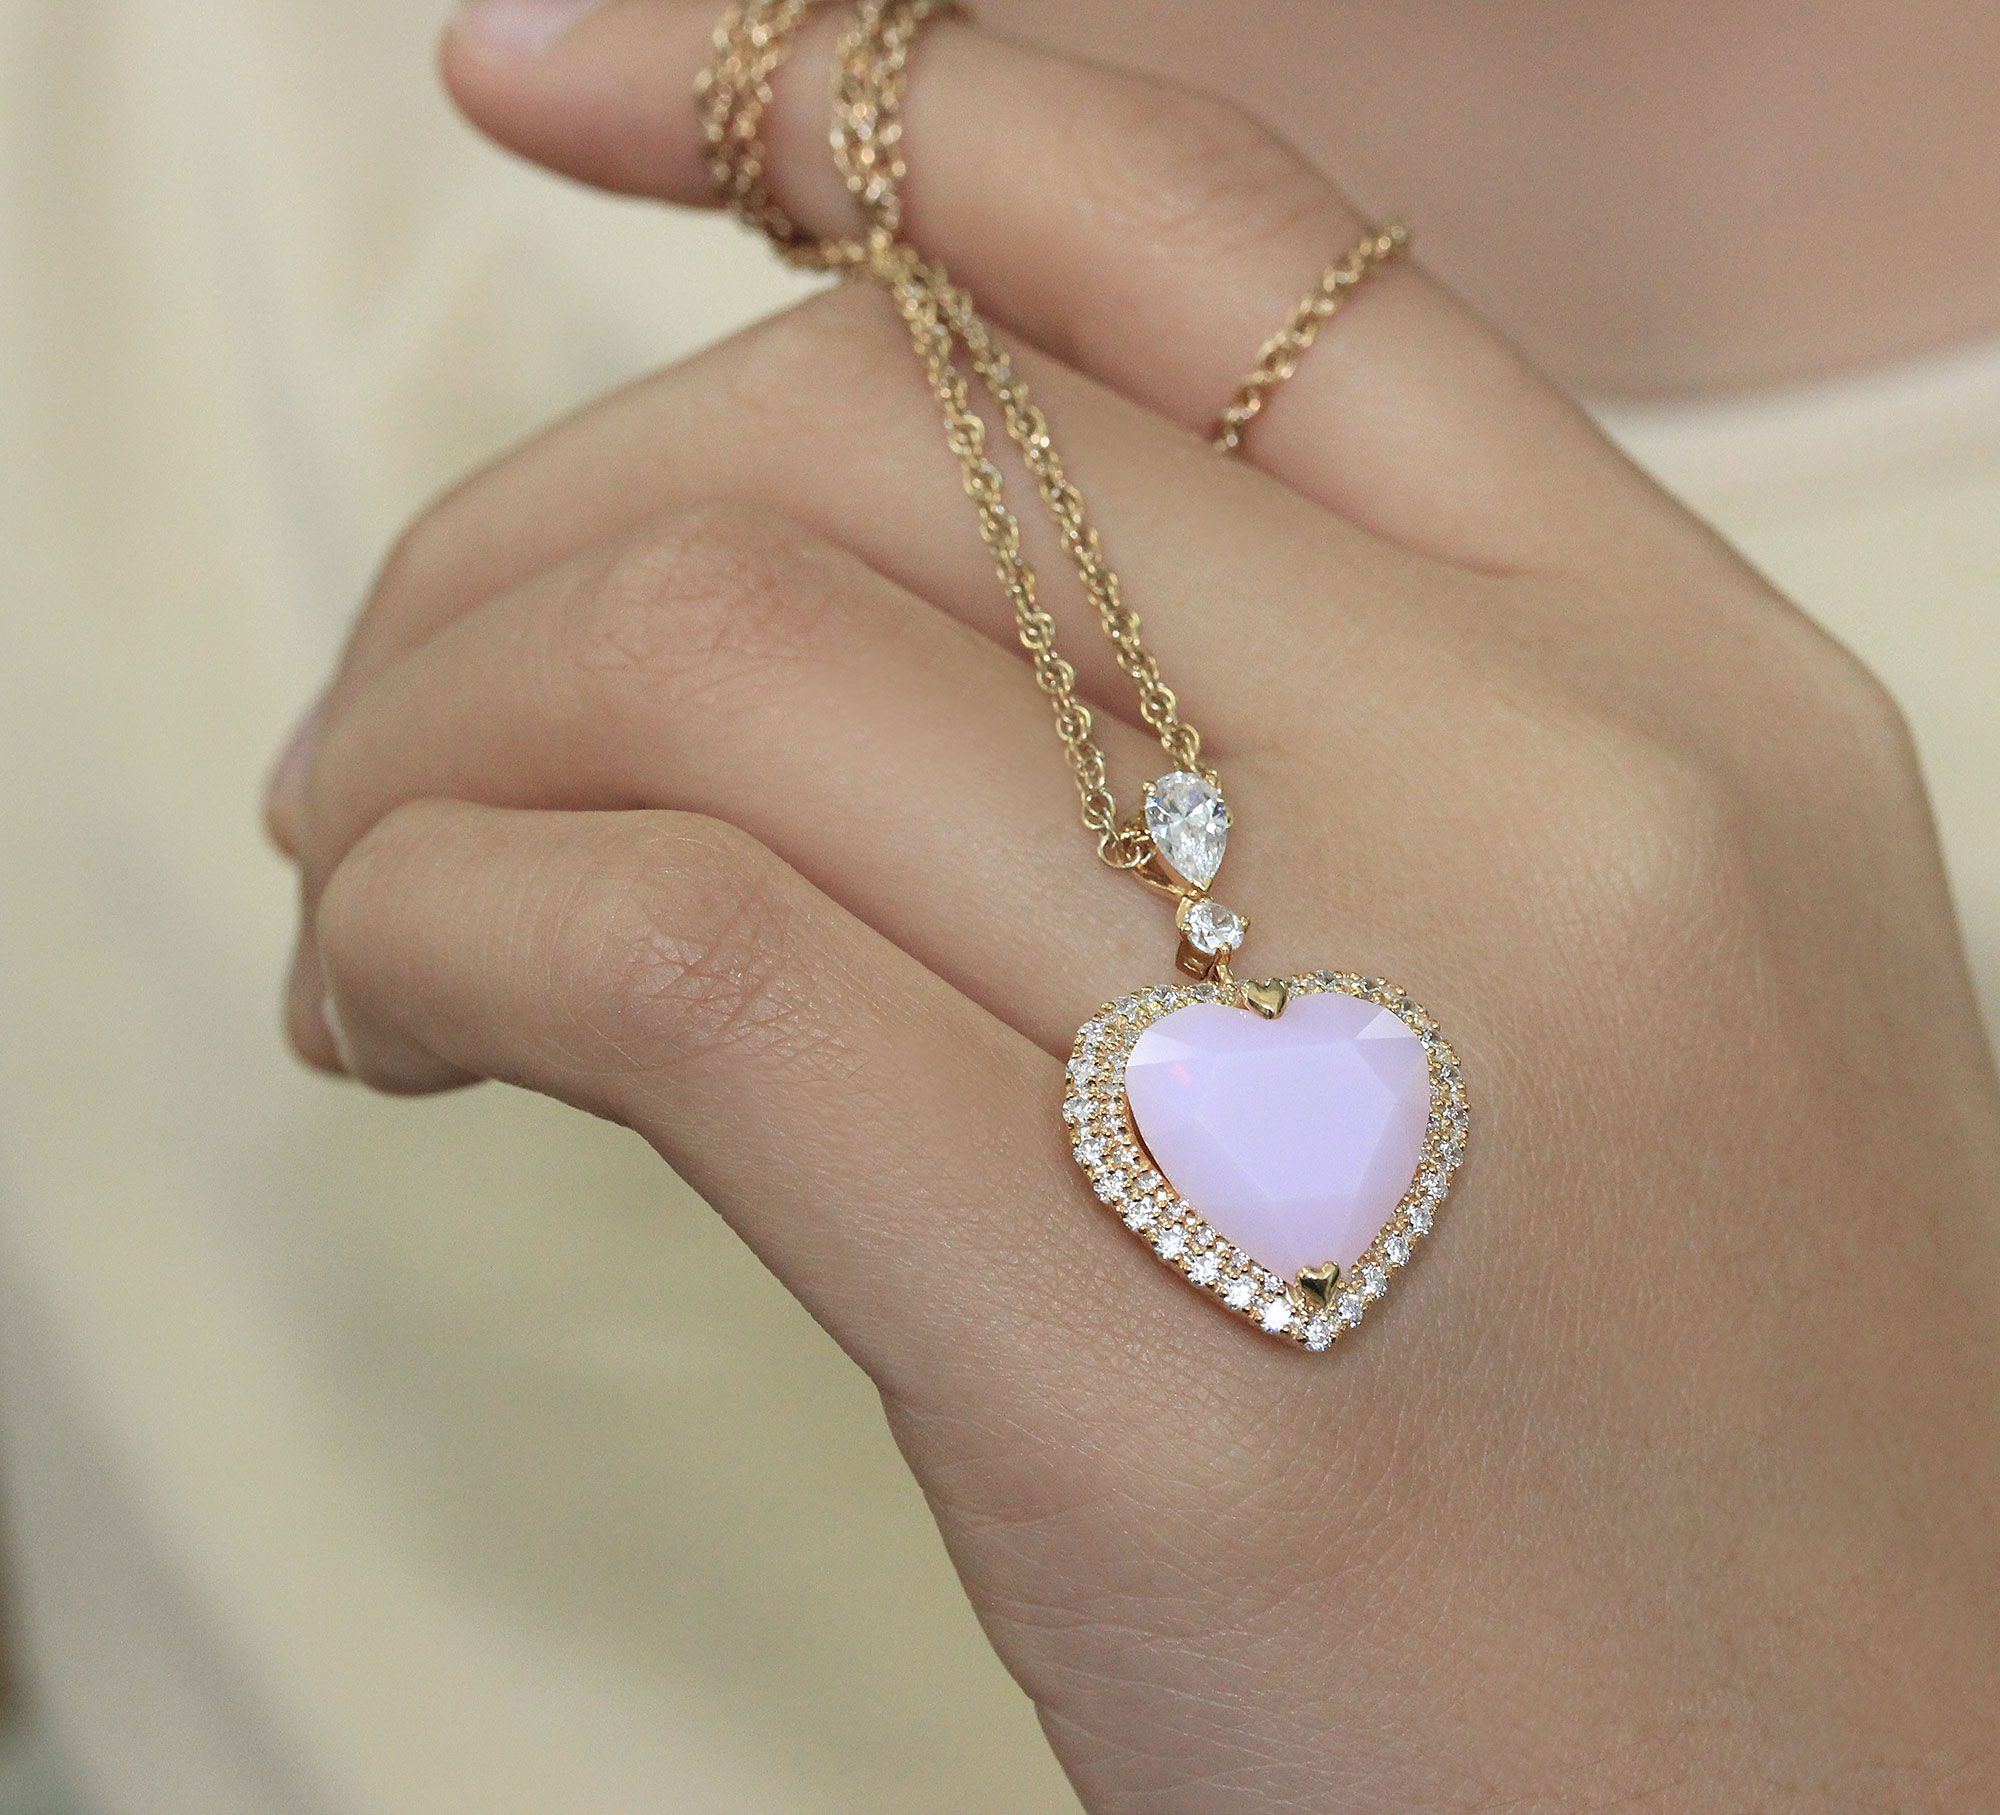 Elegant and delicate heart pendant with pinkish Opal reflection.